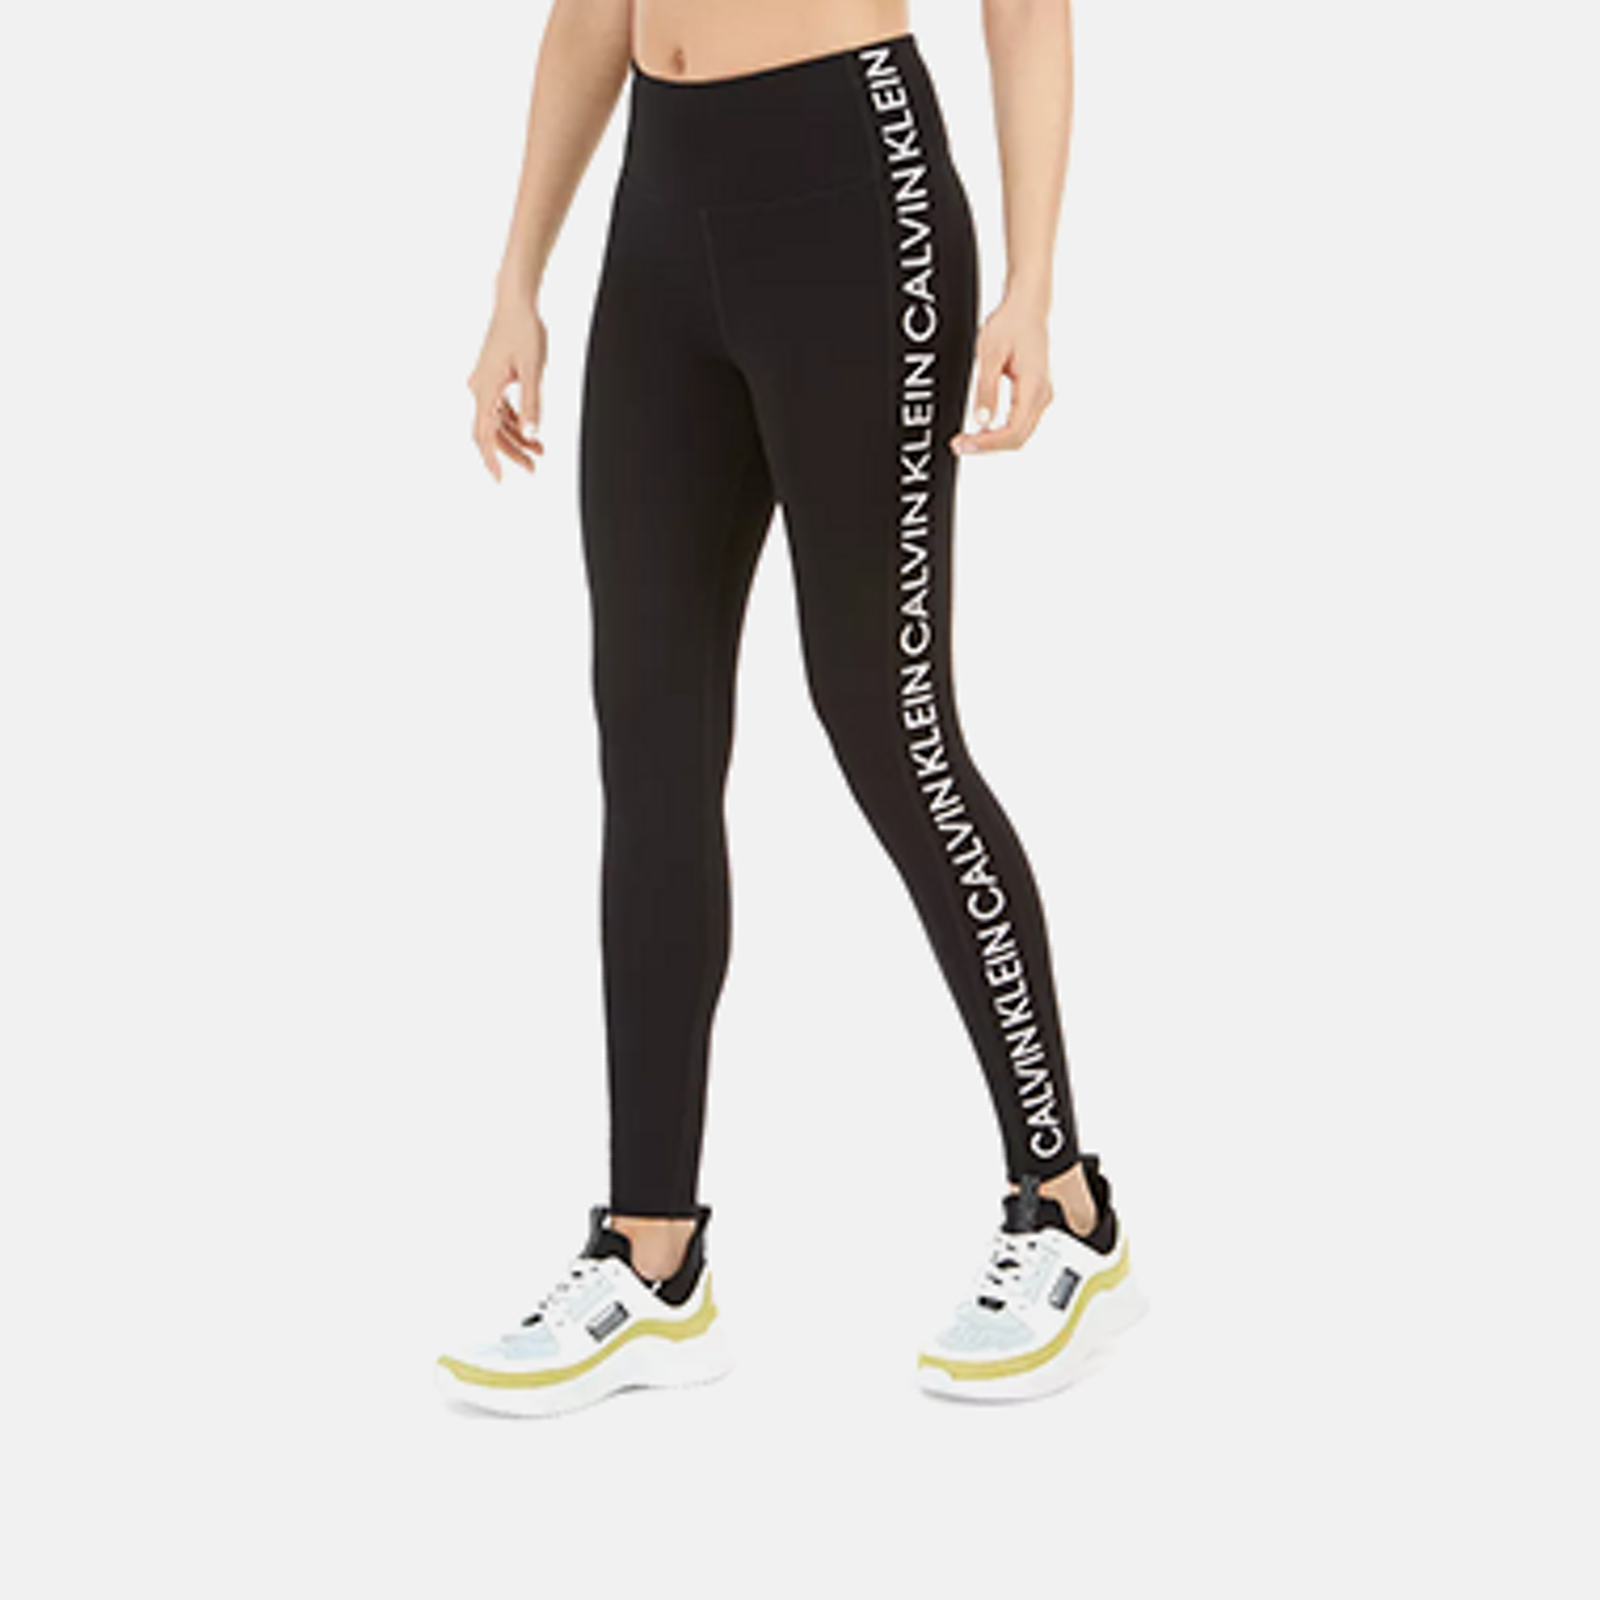 Workout Clothes: Women's Activewear & Athletic Wear - Macy's